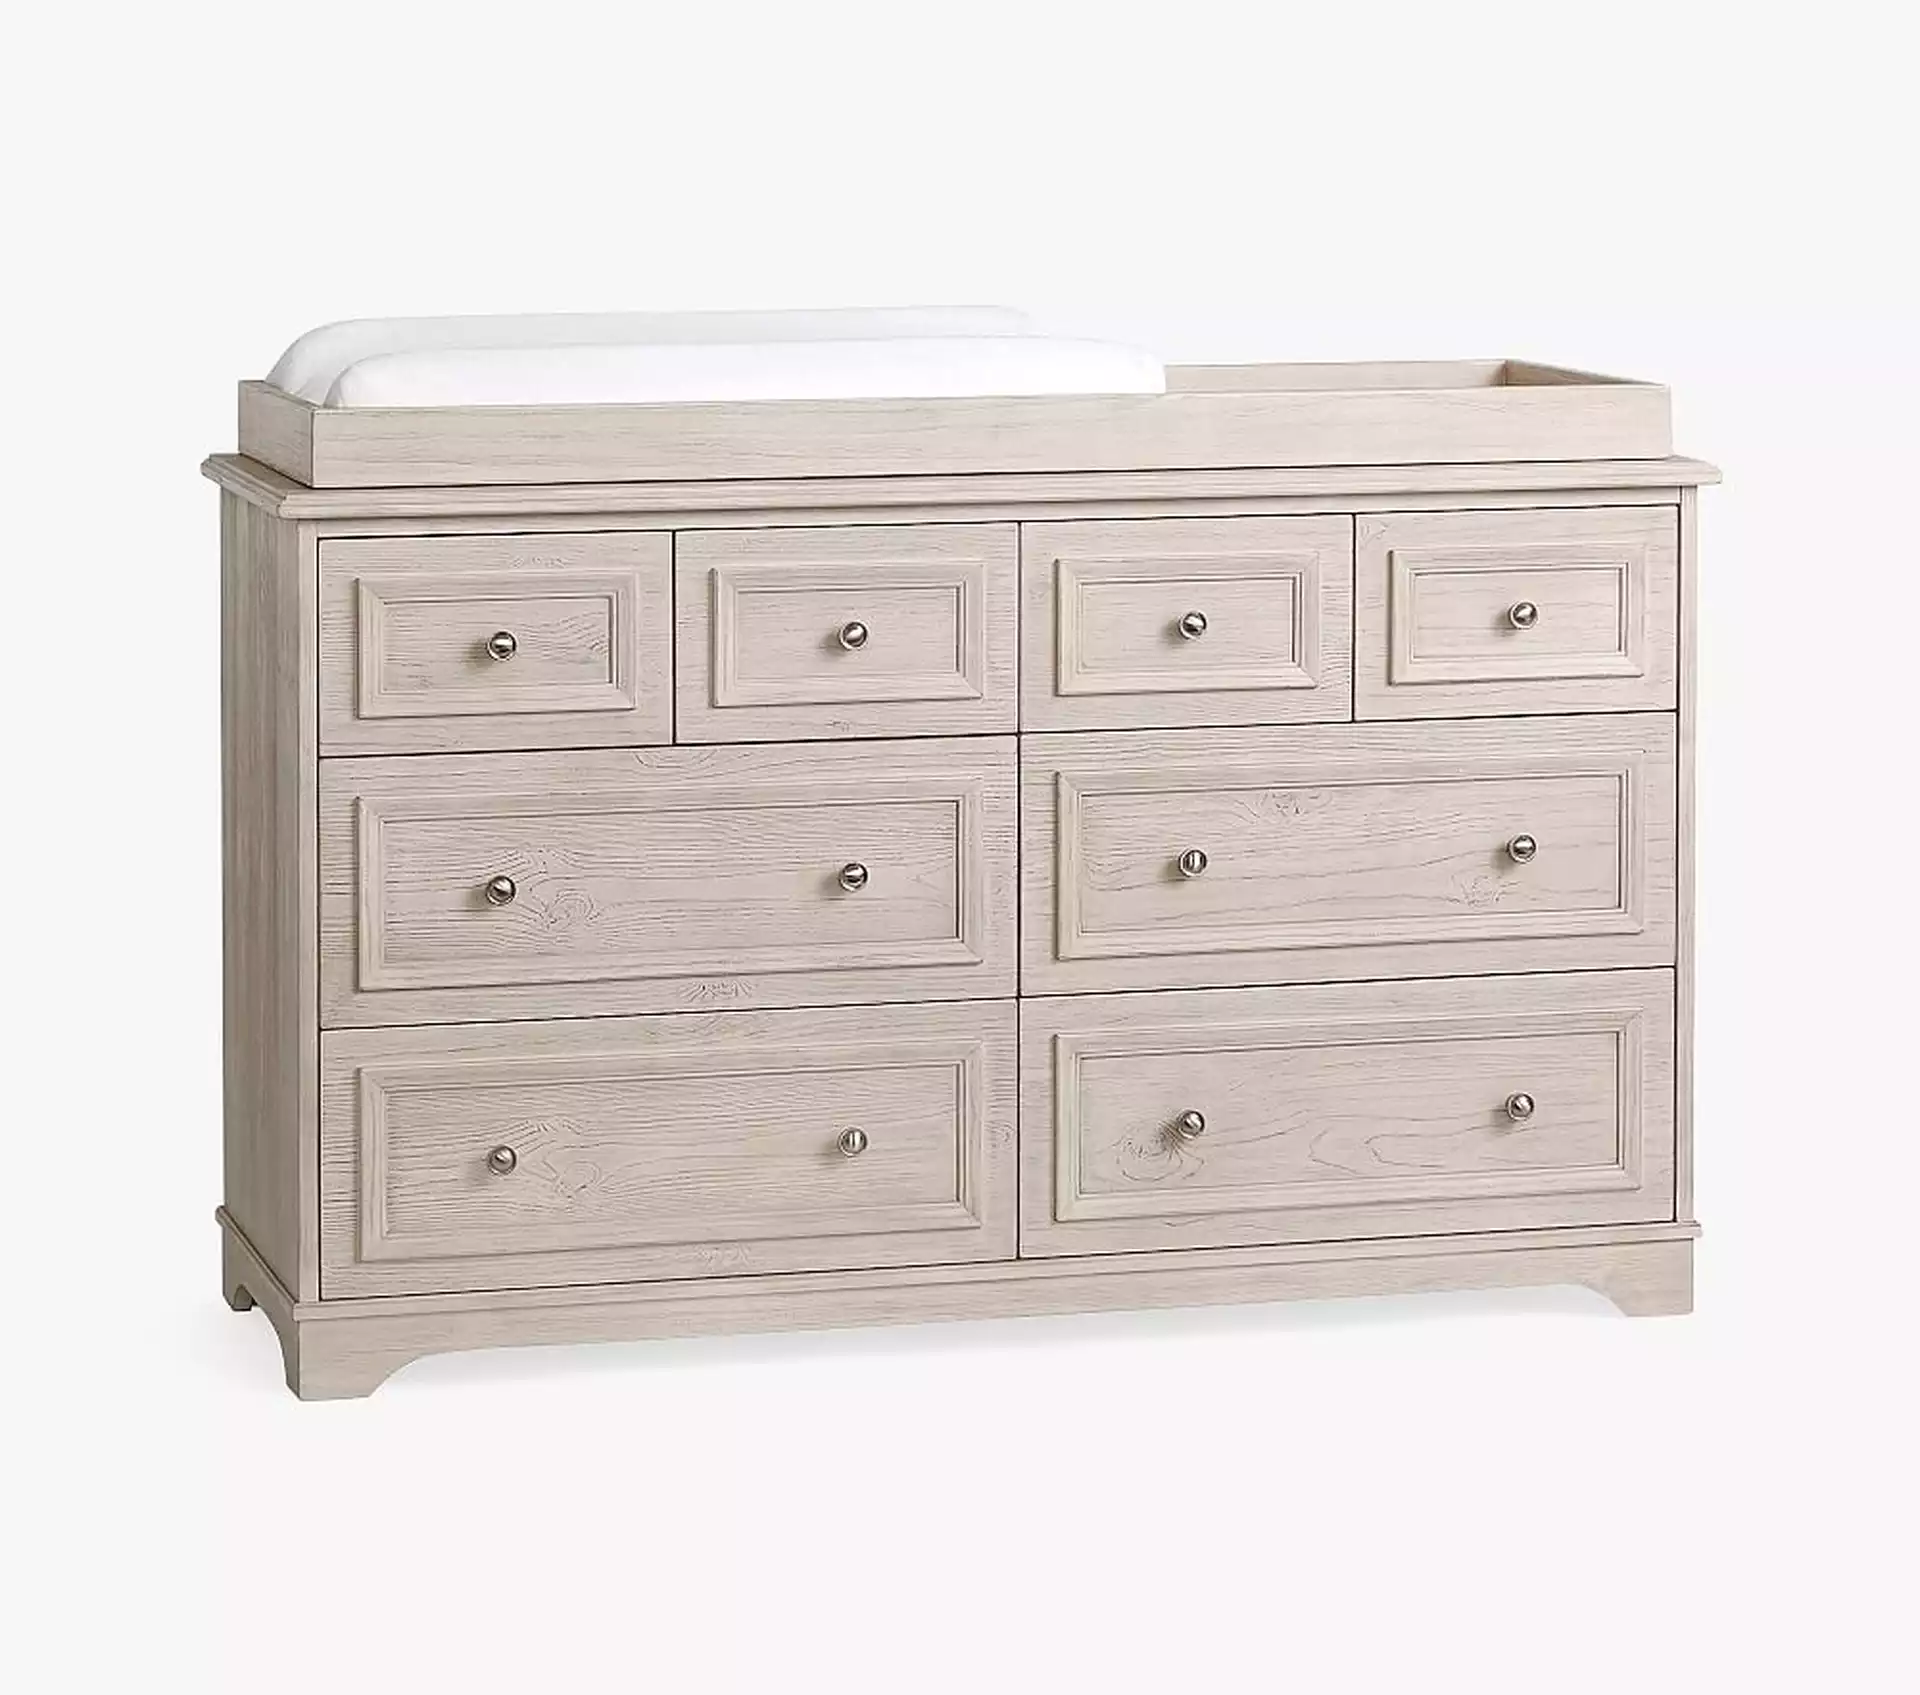 Fillmore Extra-Wide Dresser & Topper Set, Weathered White